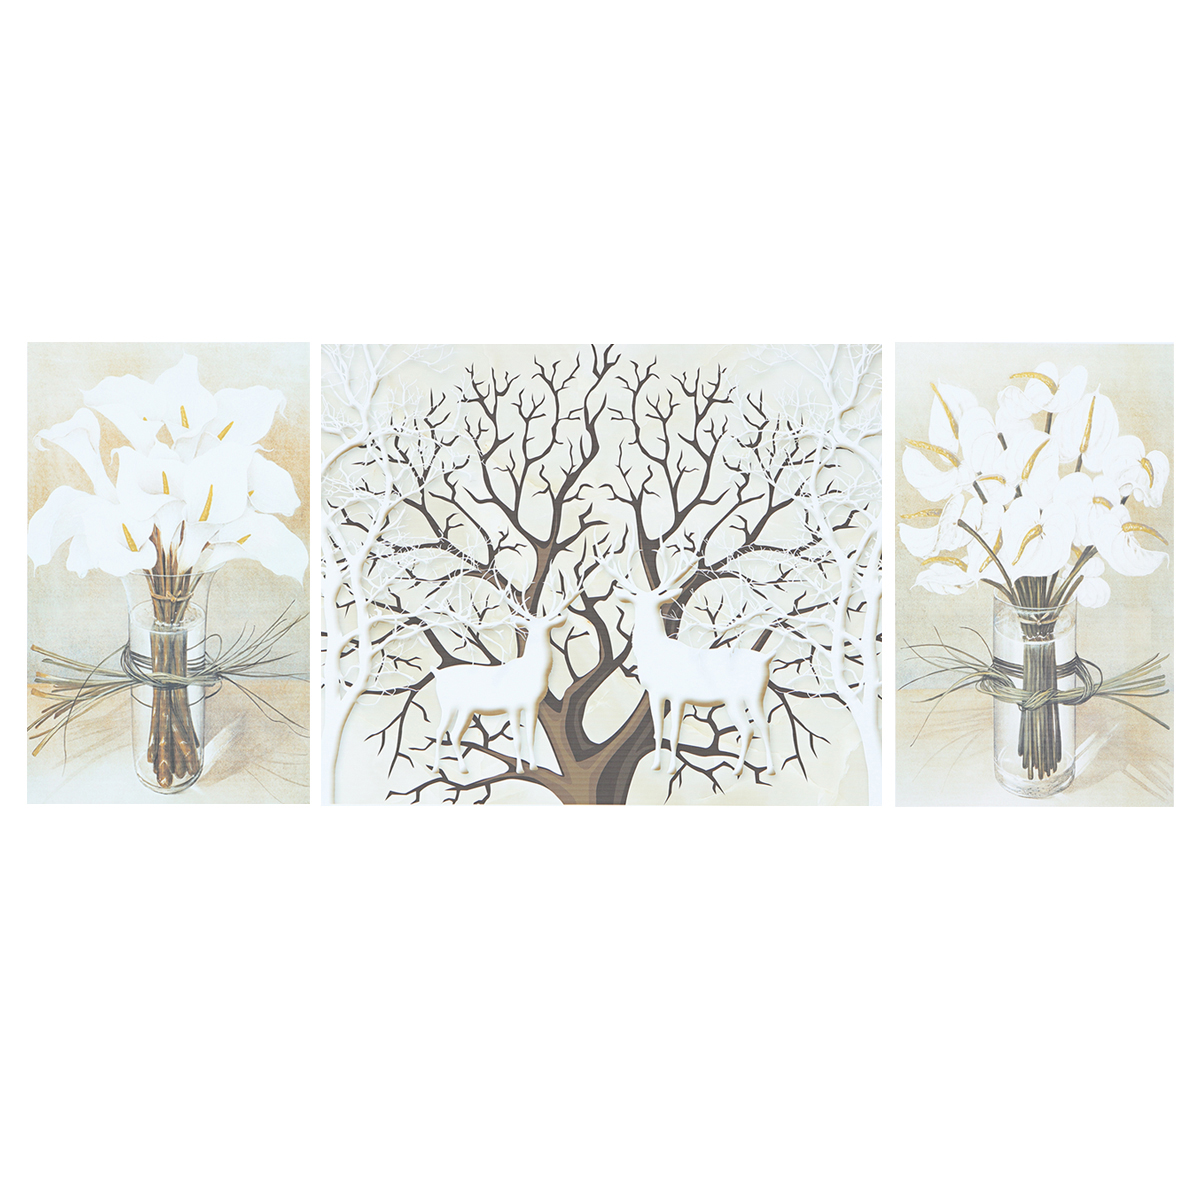 3PCS-Deer-Modern-Canvas-Print-Paintings-Wall-Art-Pictures-Home-Decoration-Unframed-1432216